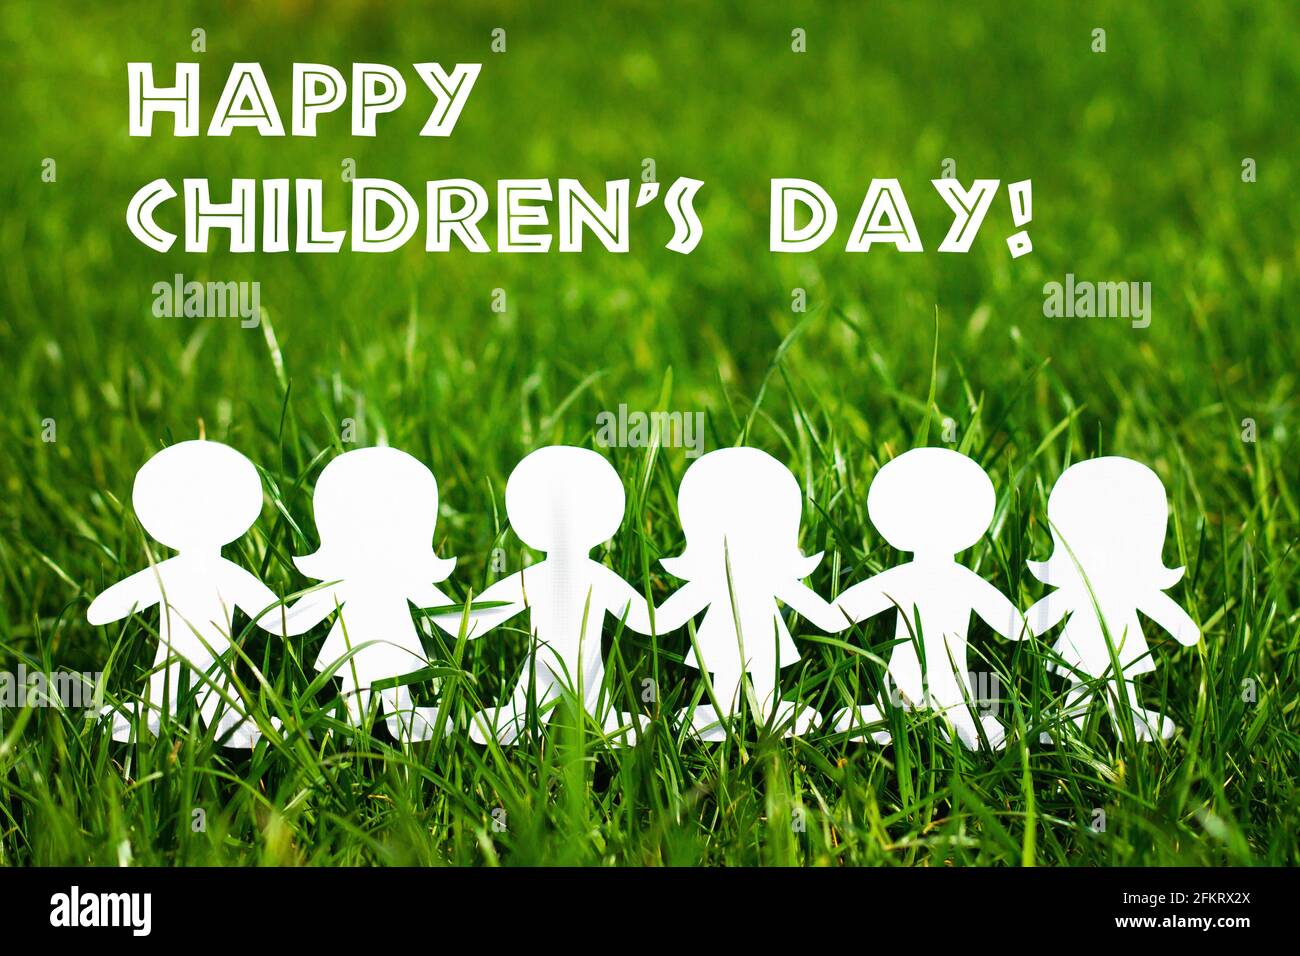 Silhouettes of children holding hands cut out of cardboard on a background of grass. Girls and boys made of white paper. International children's day. Stock Photo